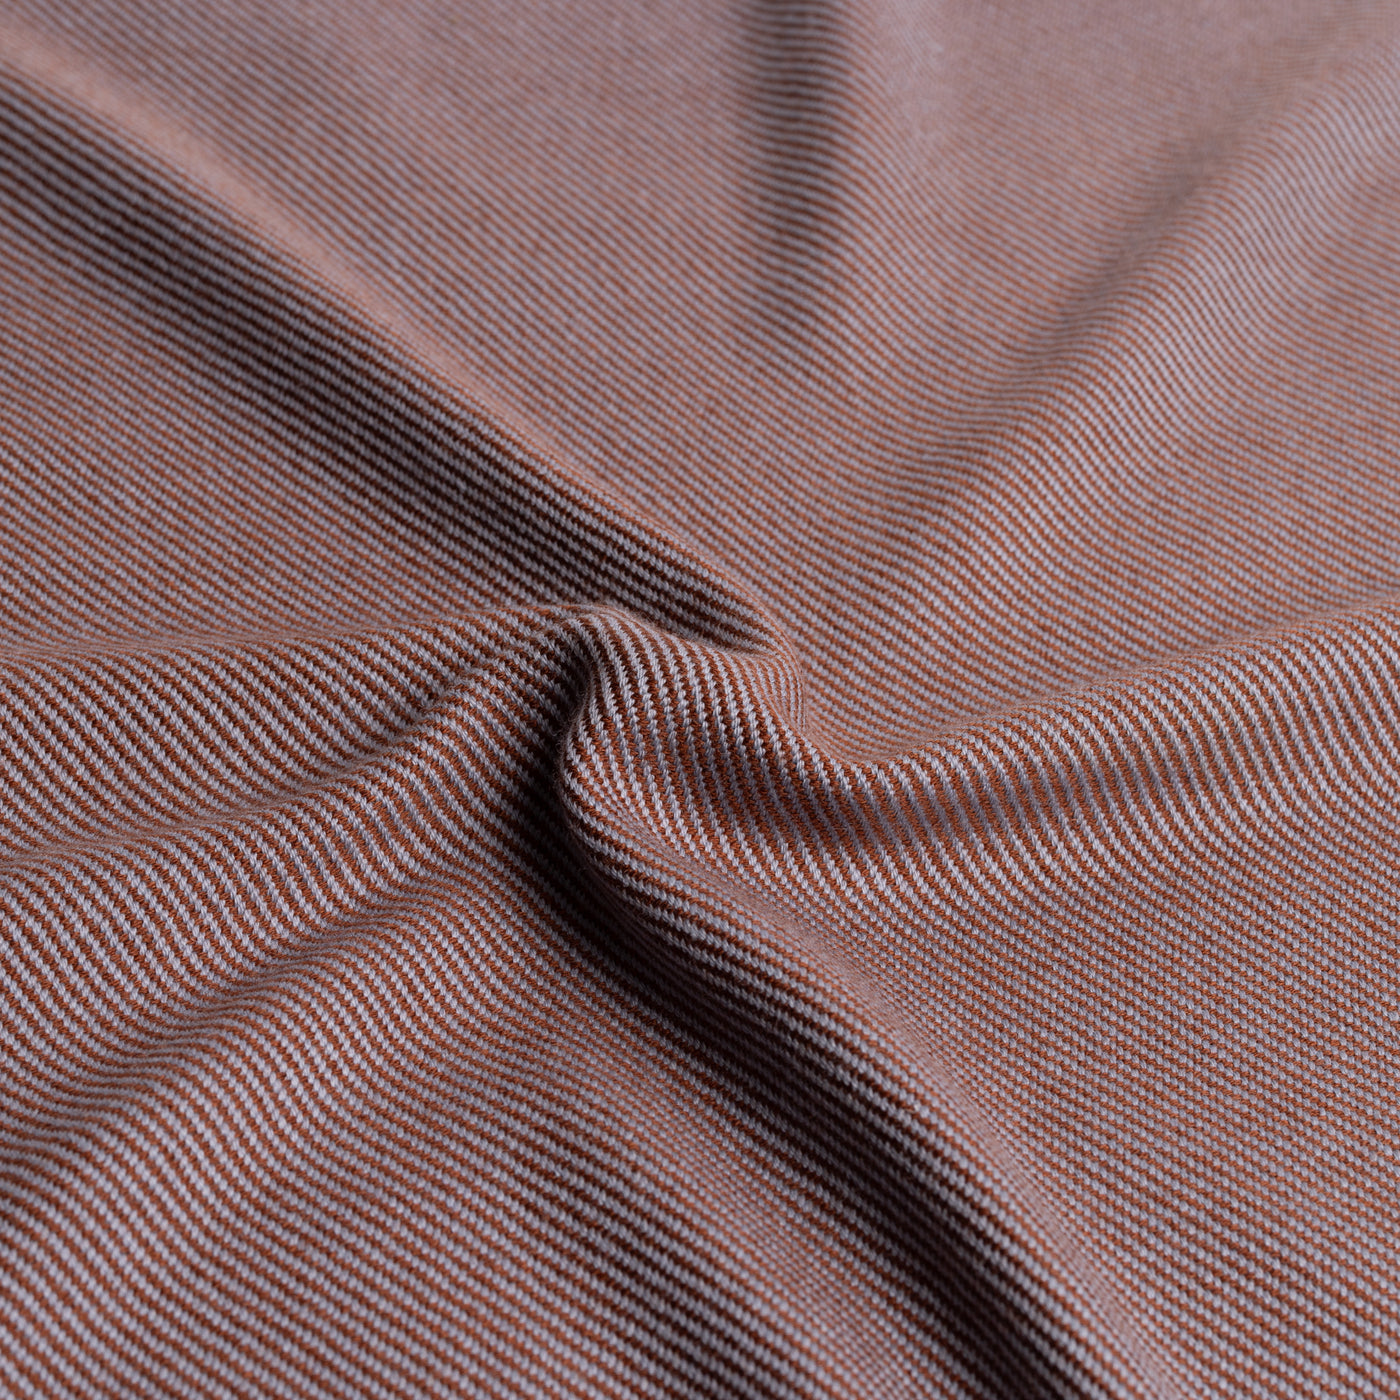 Twill Wool, Handwoven, Plant Dye Grey and Brown